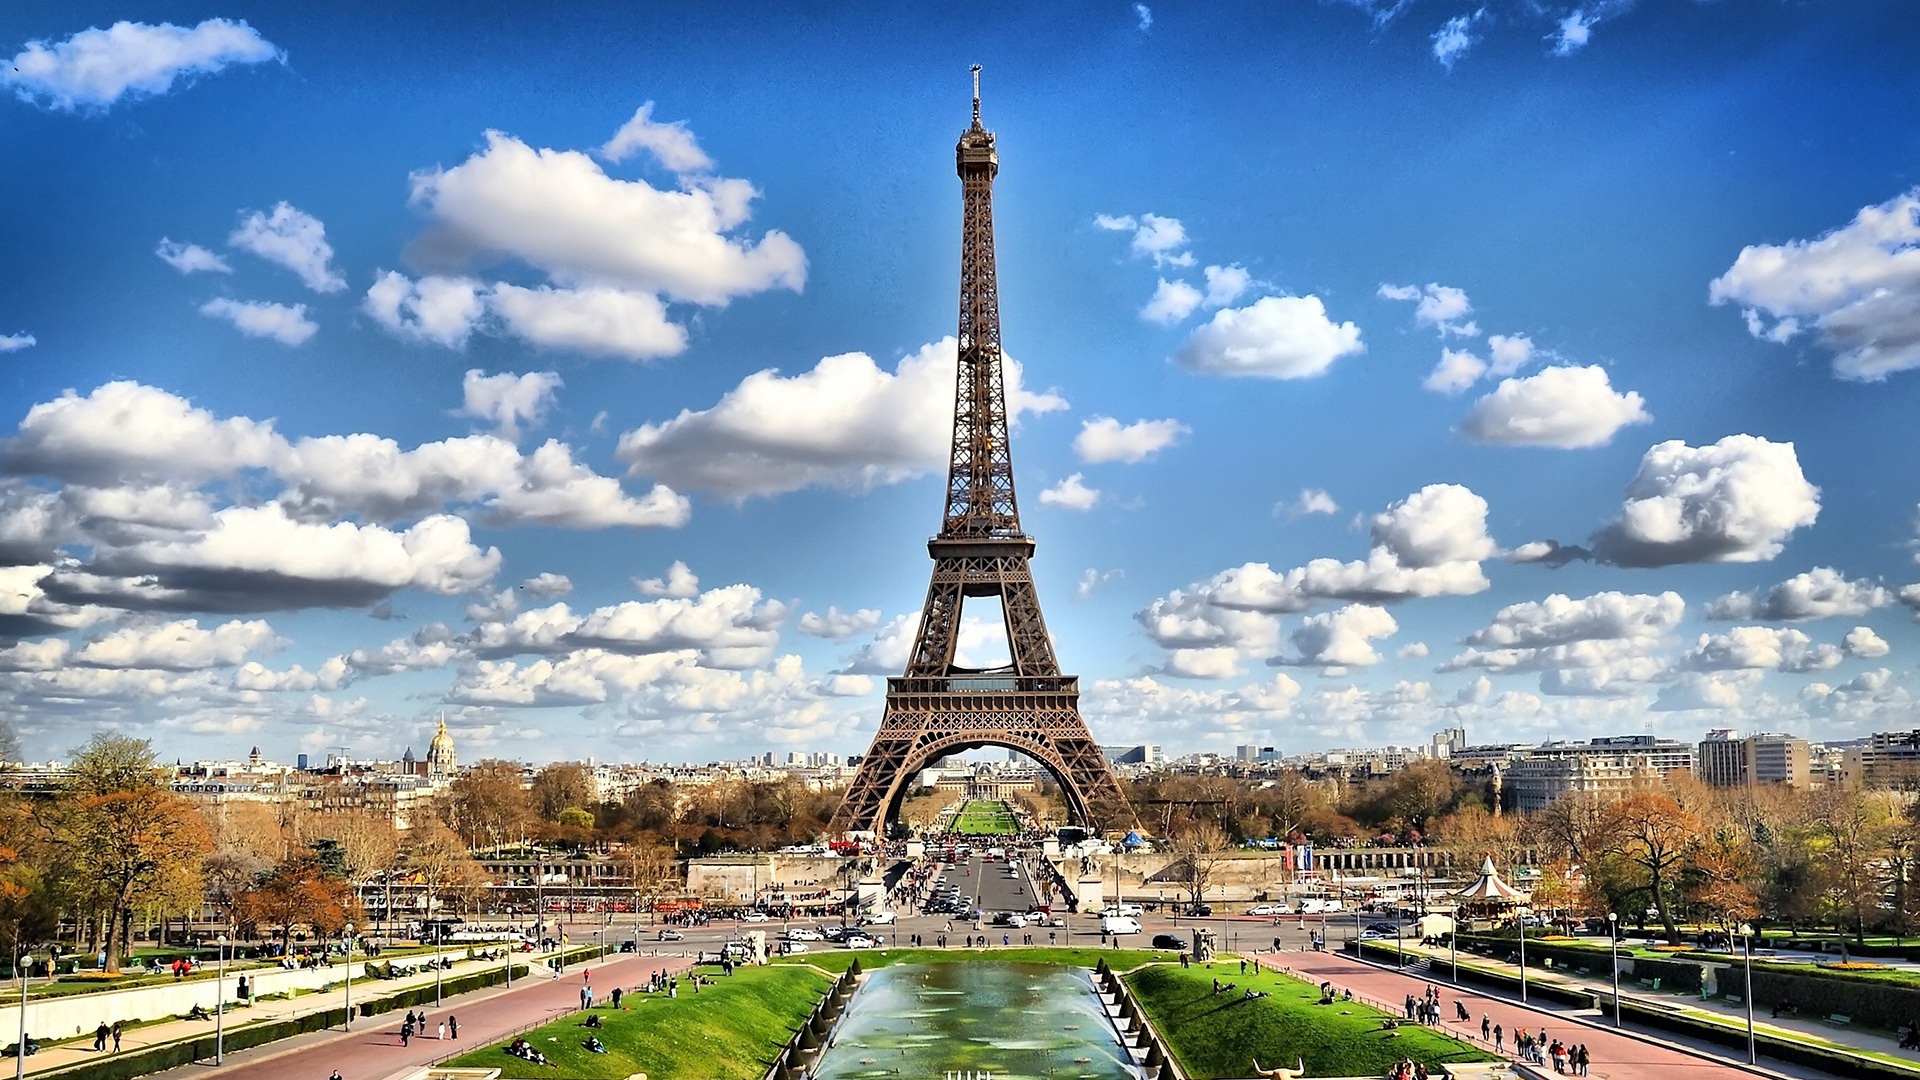 Eiffel Tower On Background Of Clouds In Paris France Wallpapers